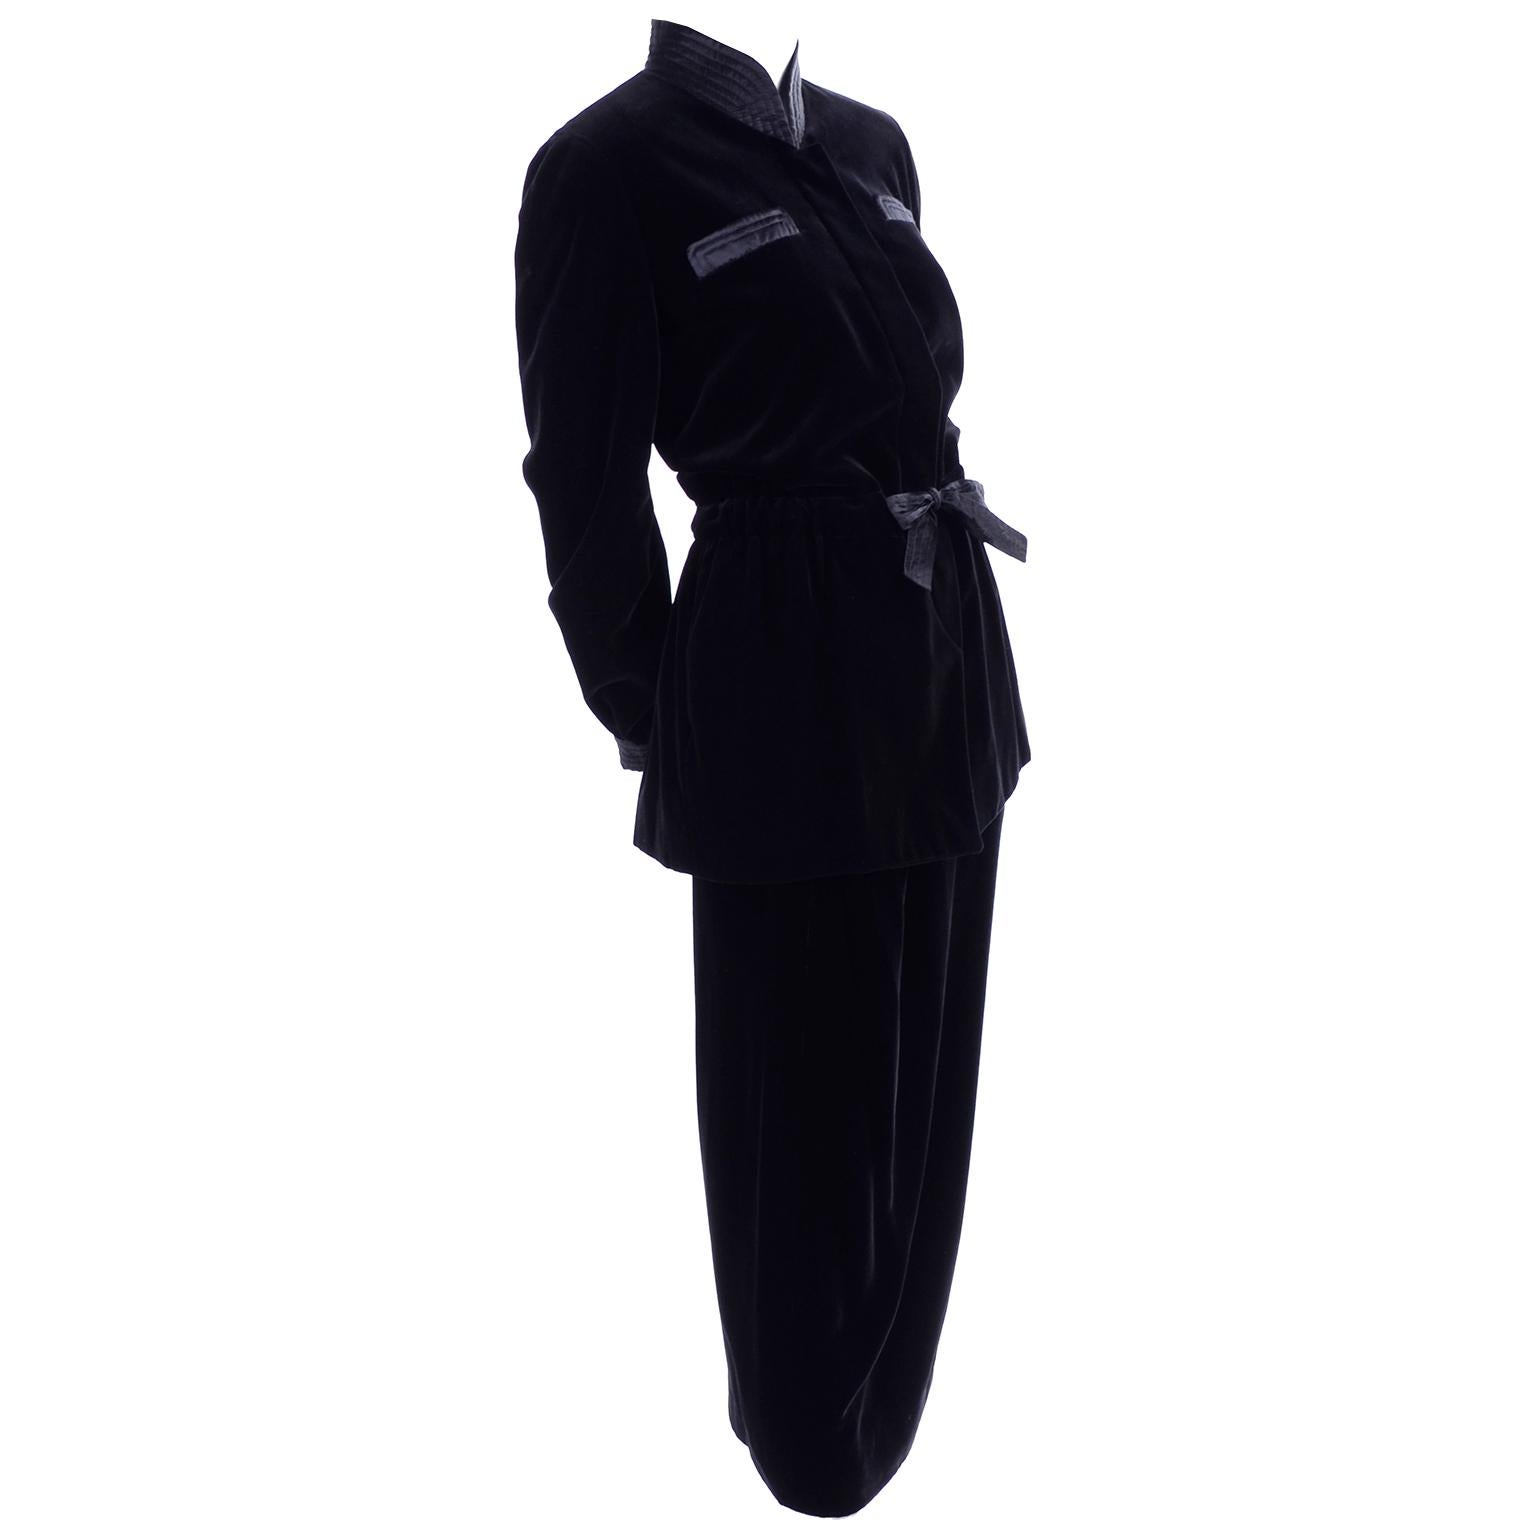 This is a beautiful Valentino Boutique black velvet skirt suit with a pencil skirt and belted smoking jacket. The pretty jacket ties at the waist and has hidden buttons up the front., ribbed satin on the high collar and trim on the cuffs, and